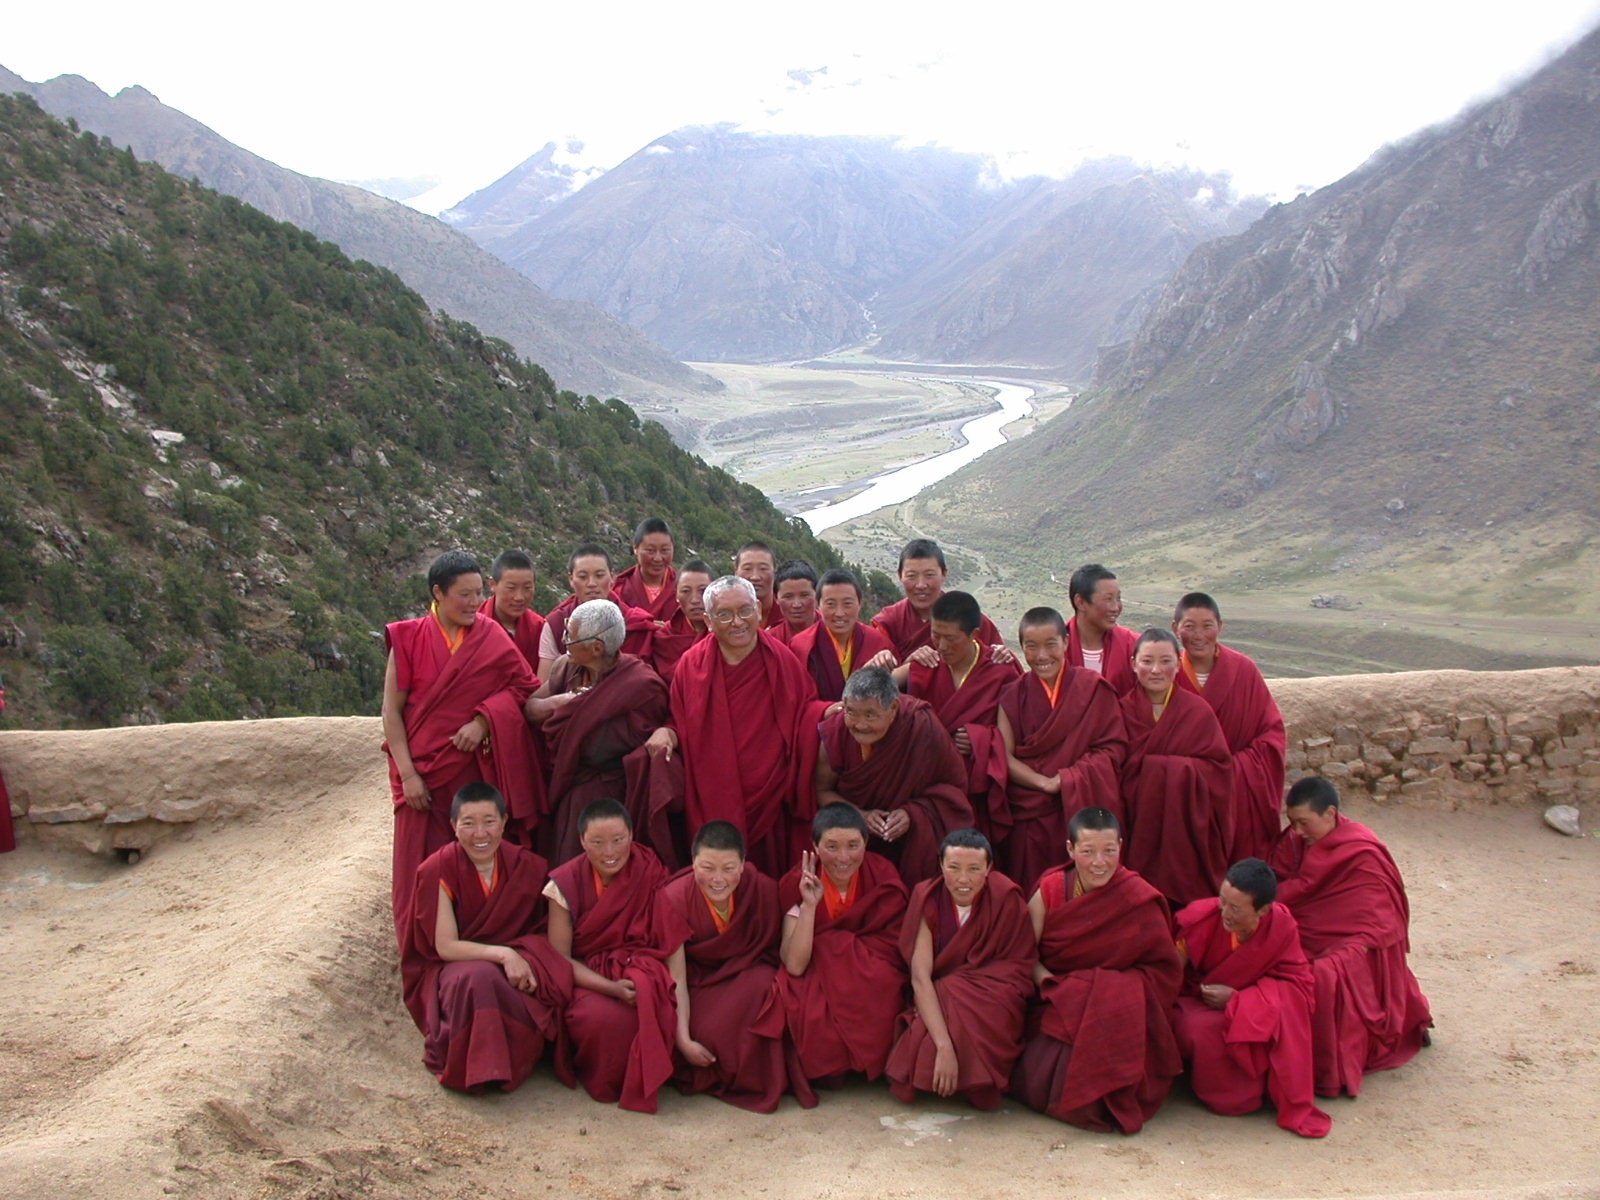 Lama Zopa Rinpoche with nuns from a nunnery he supports